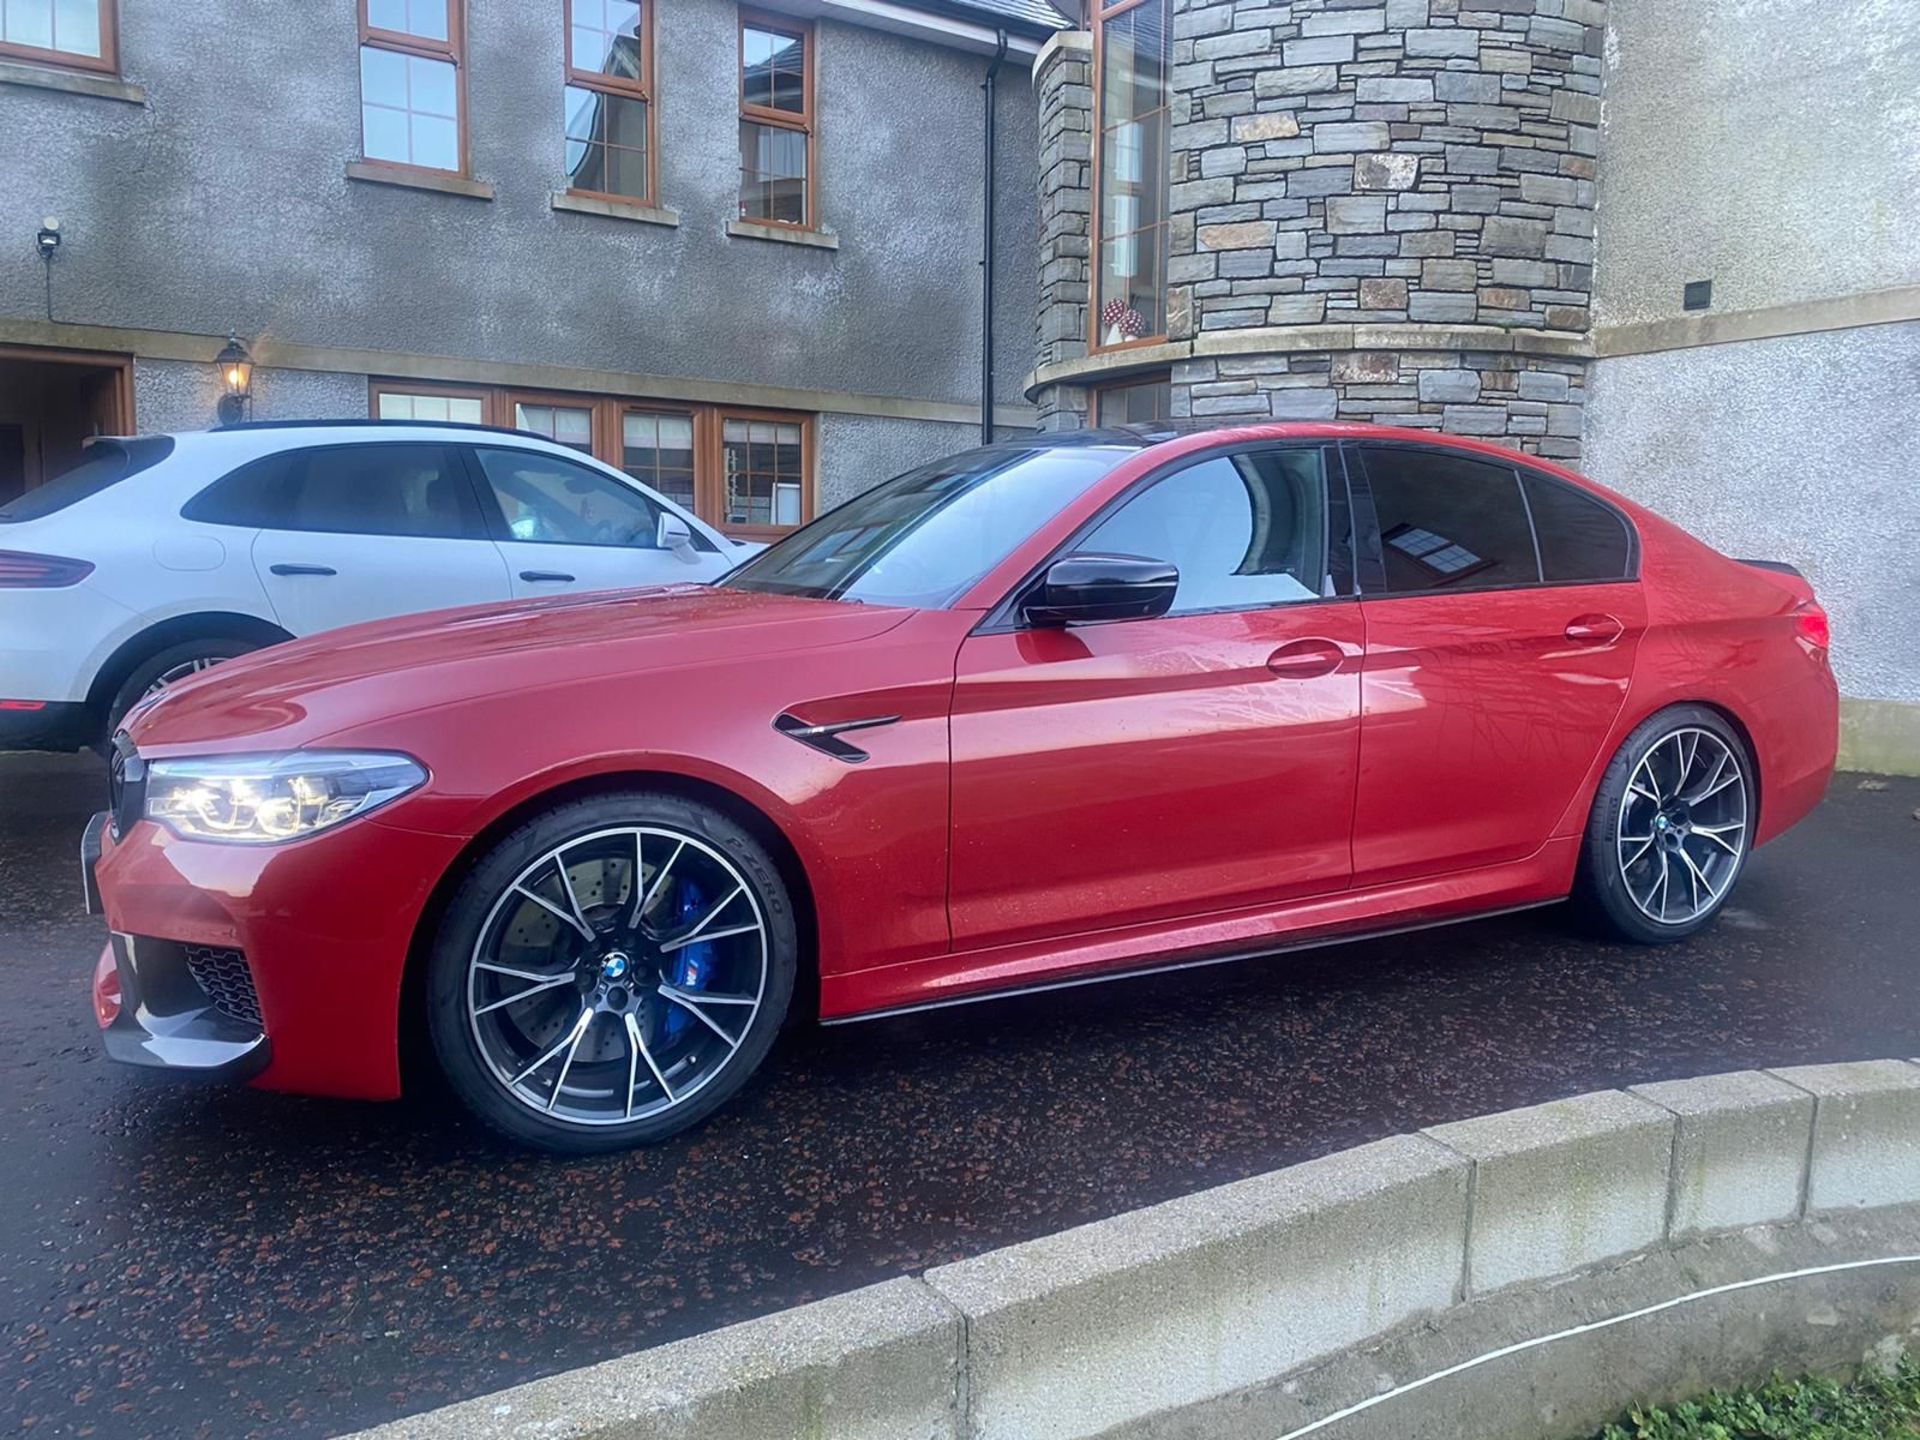 2019 BMW M5 COMPETITION AUTO RED SALOON, 18K MILES, SPECIAL ORDER RED, ONLY 4 IN THE UK *NO VAT*